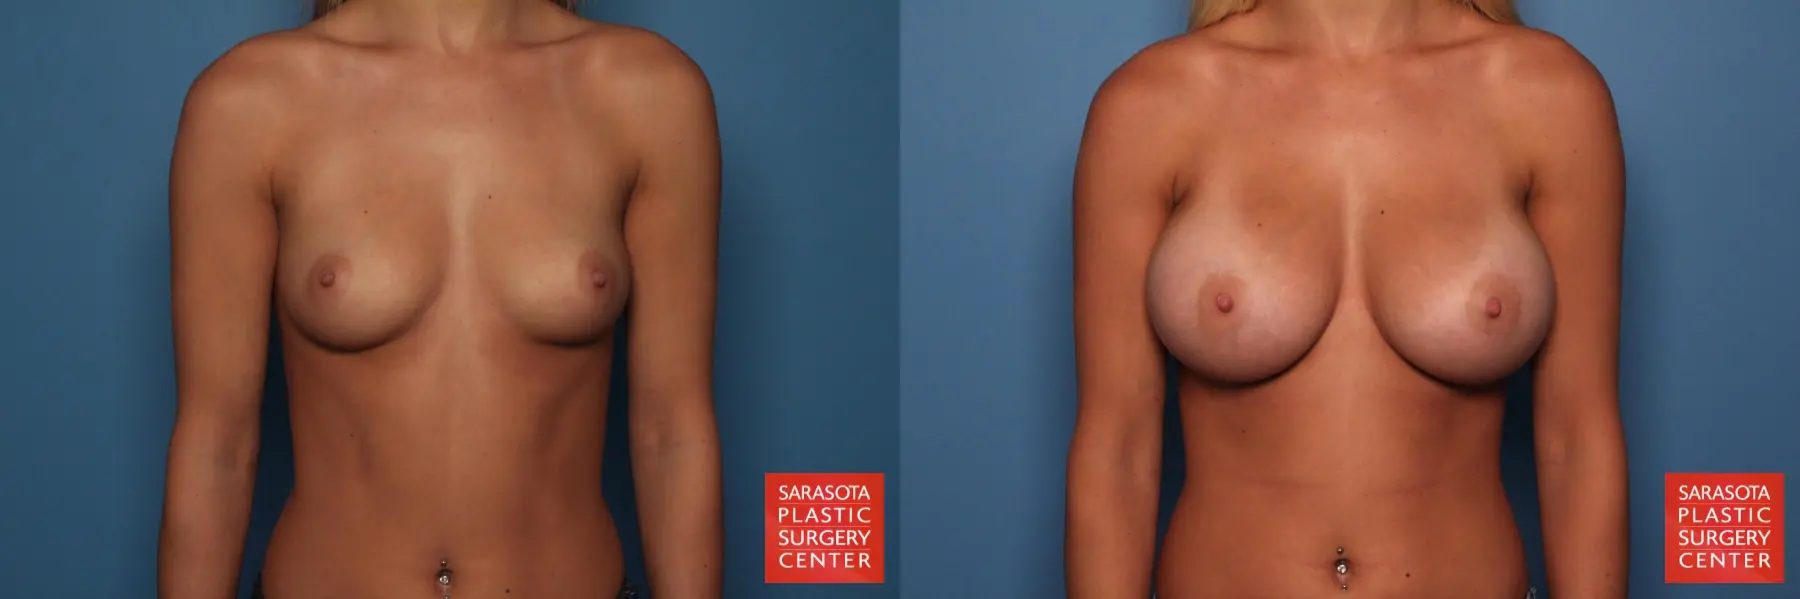 Breast Augmentation: Patient 9 - Before and After 1